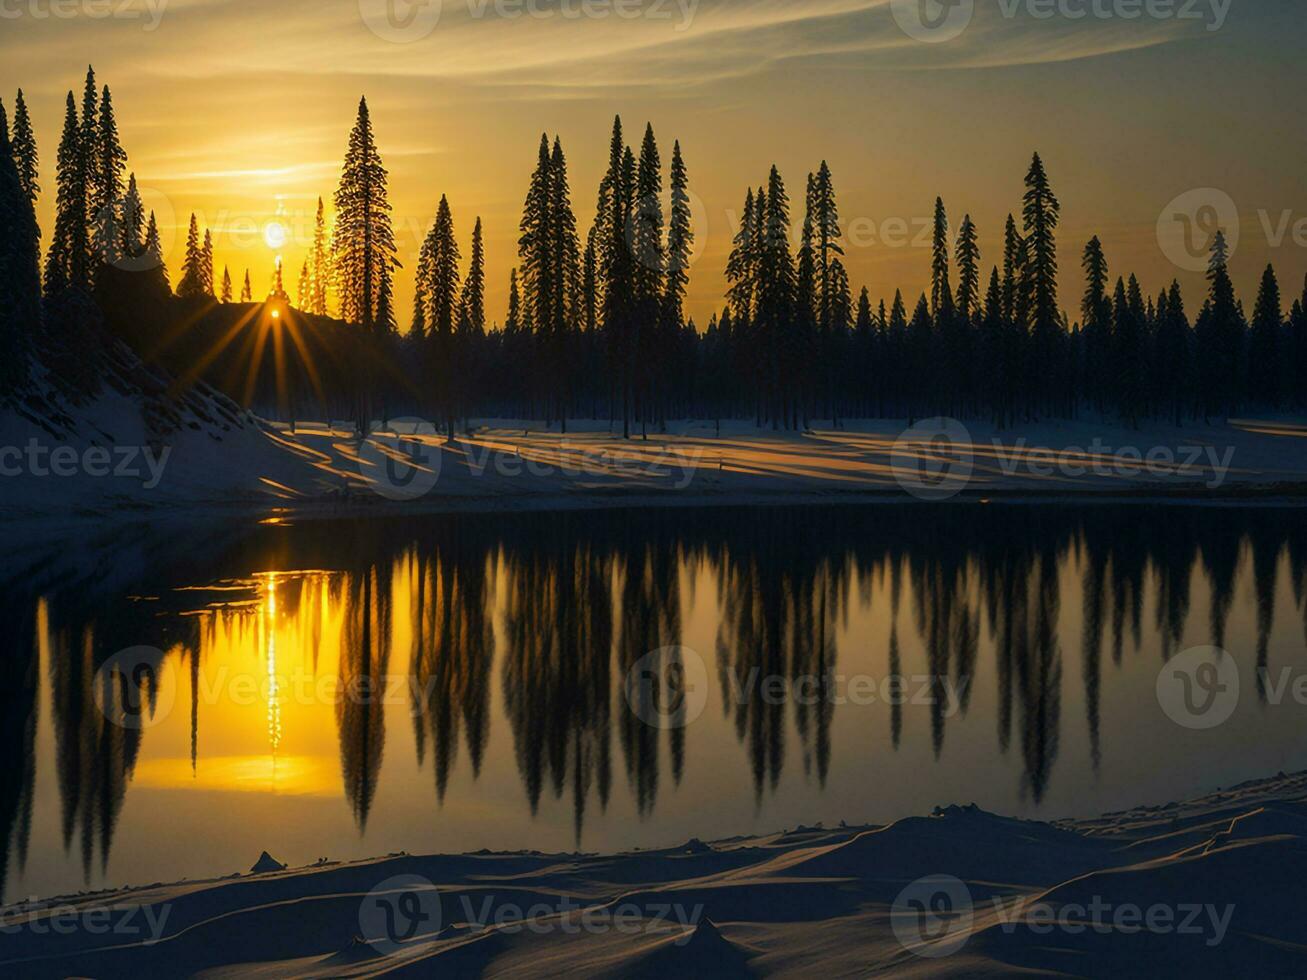 AI generated An image of a vibrant sunset over a serene lake, with colorful reflections shimmering on the water with snow photo